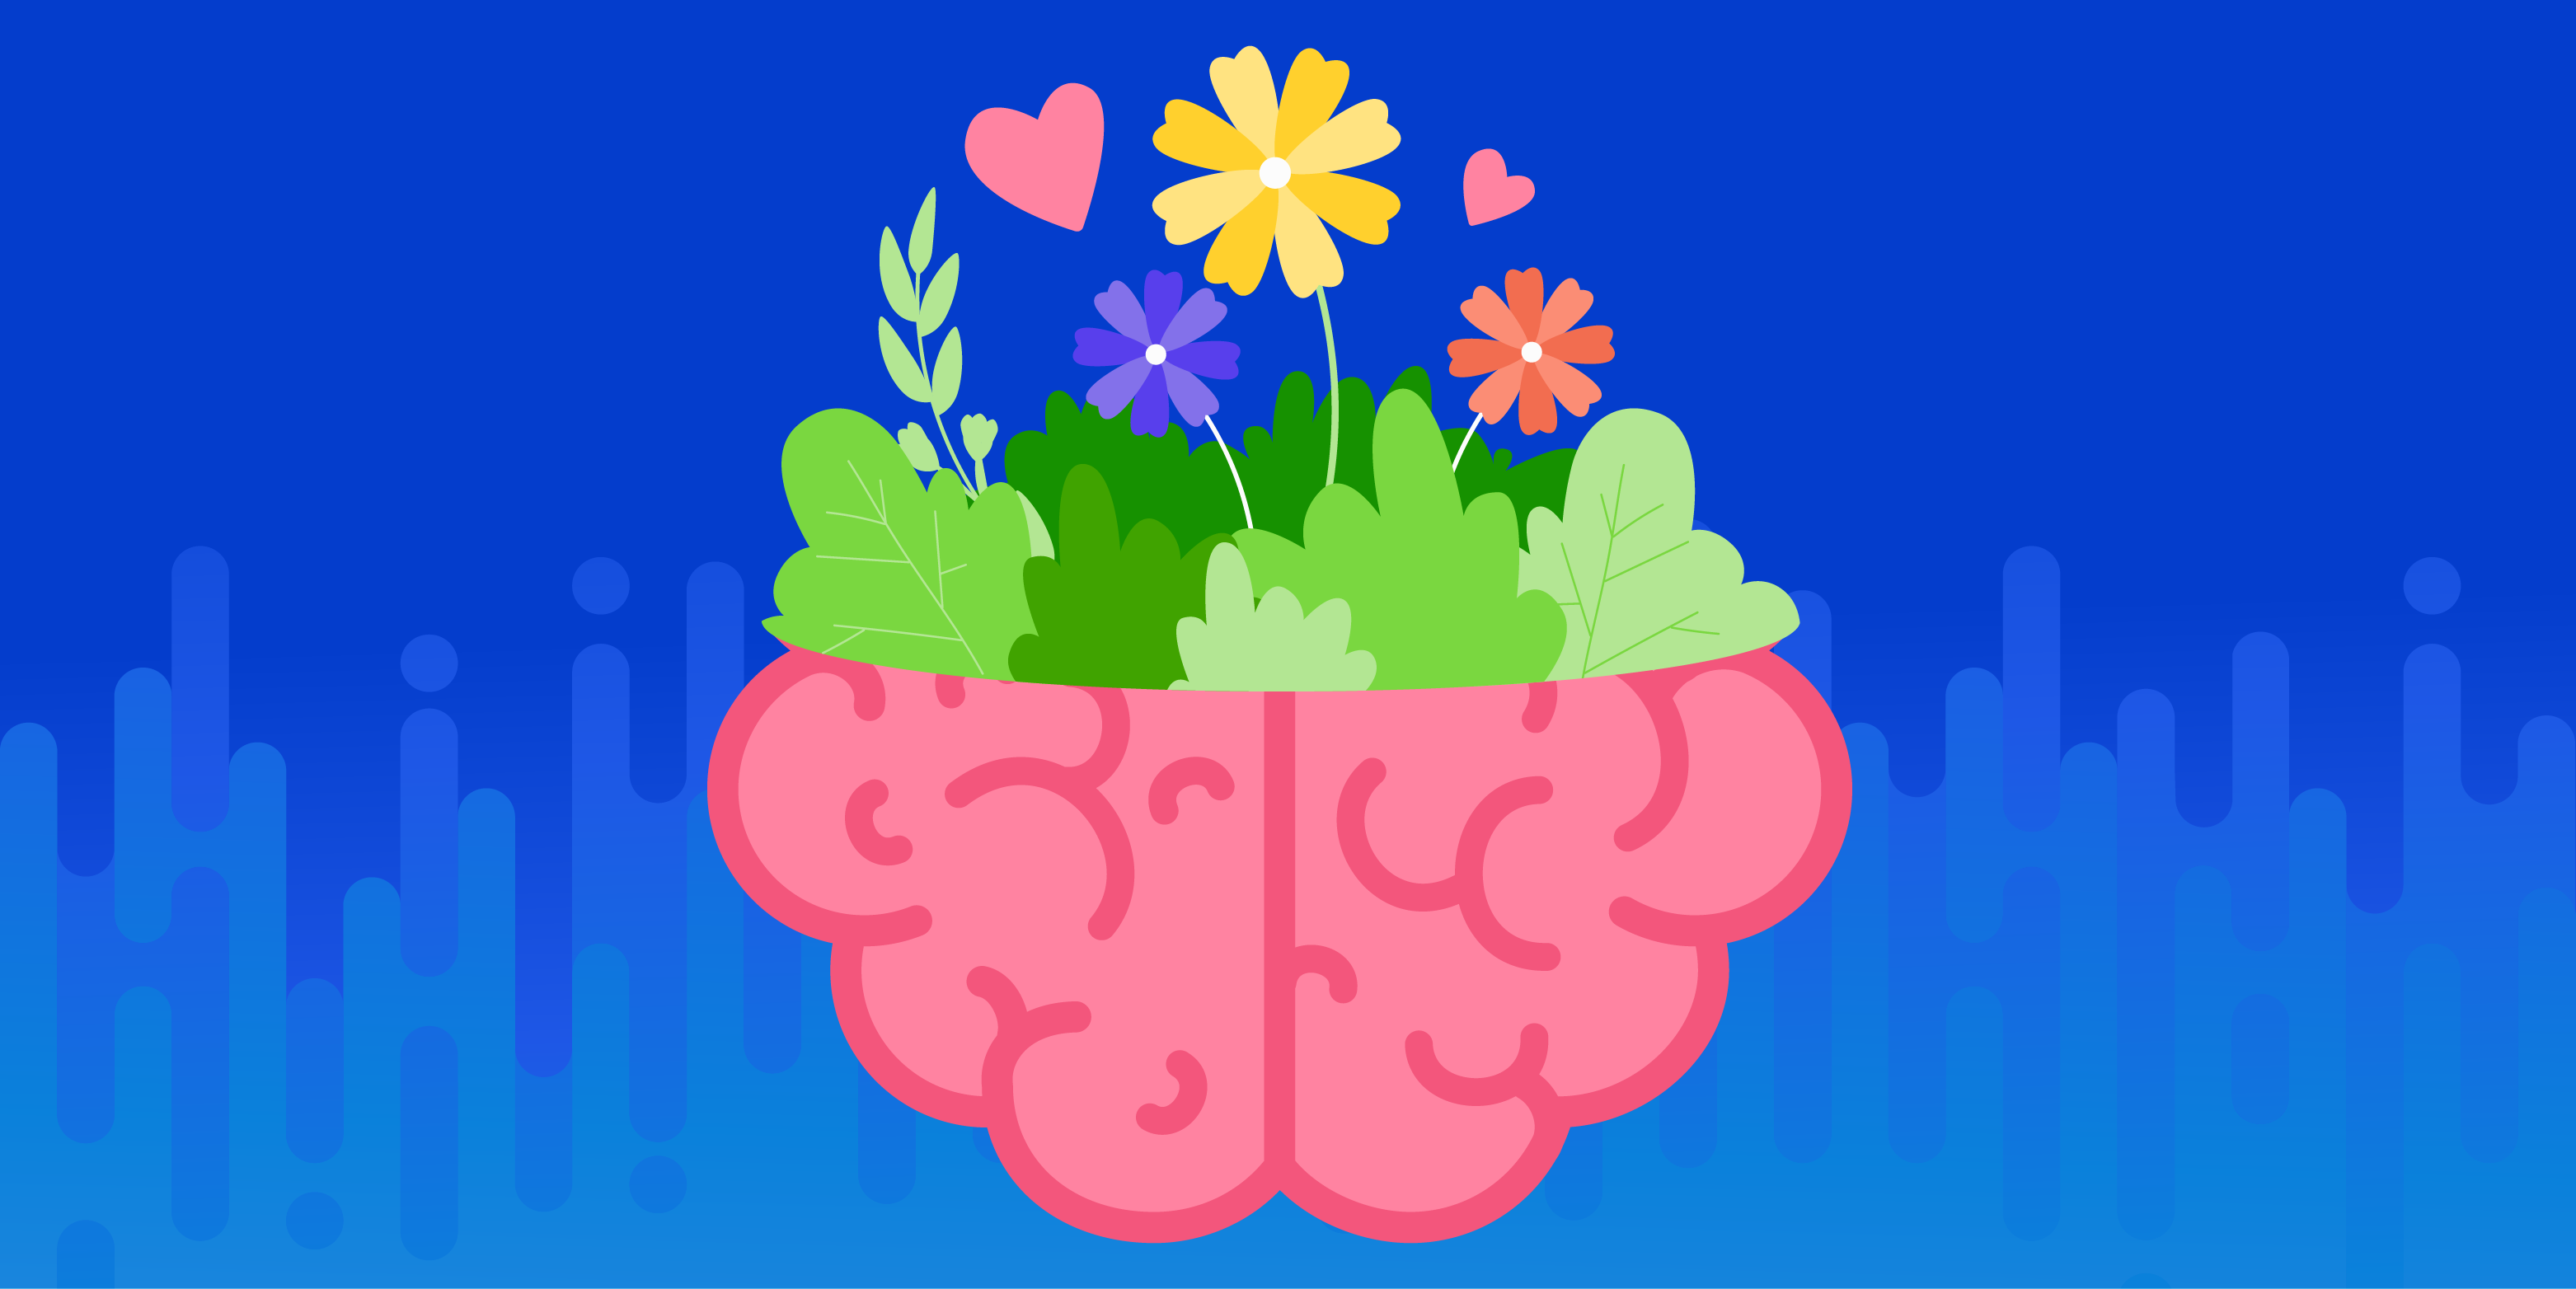 A cartoon brain sits against a blue background while flowers, hearts, and green bushes sprout from it. 